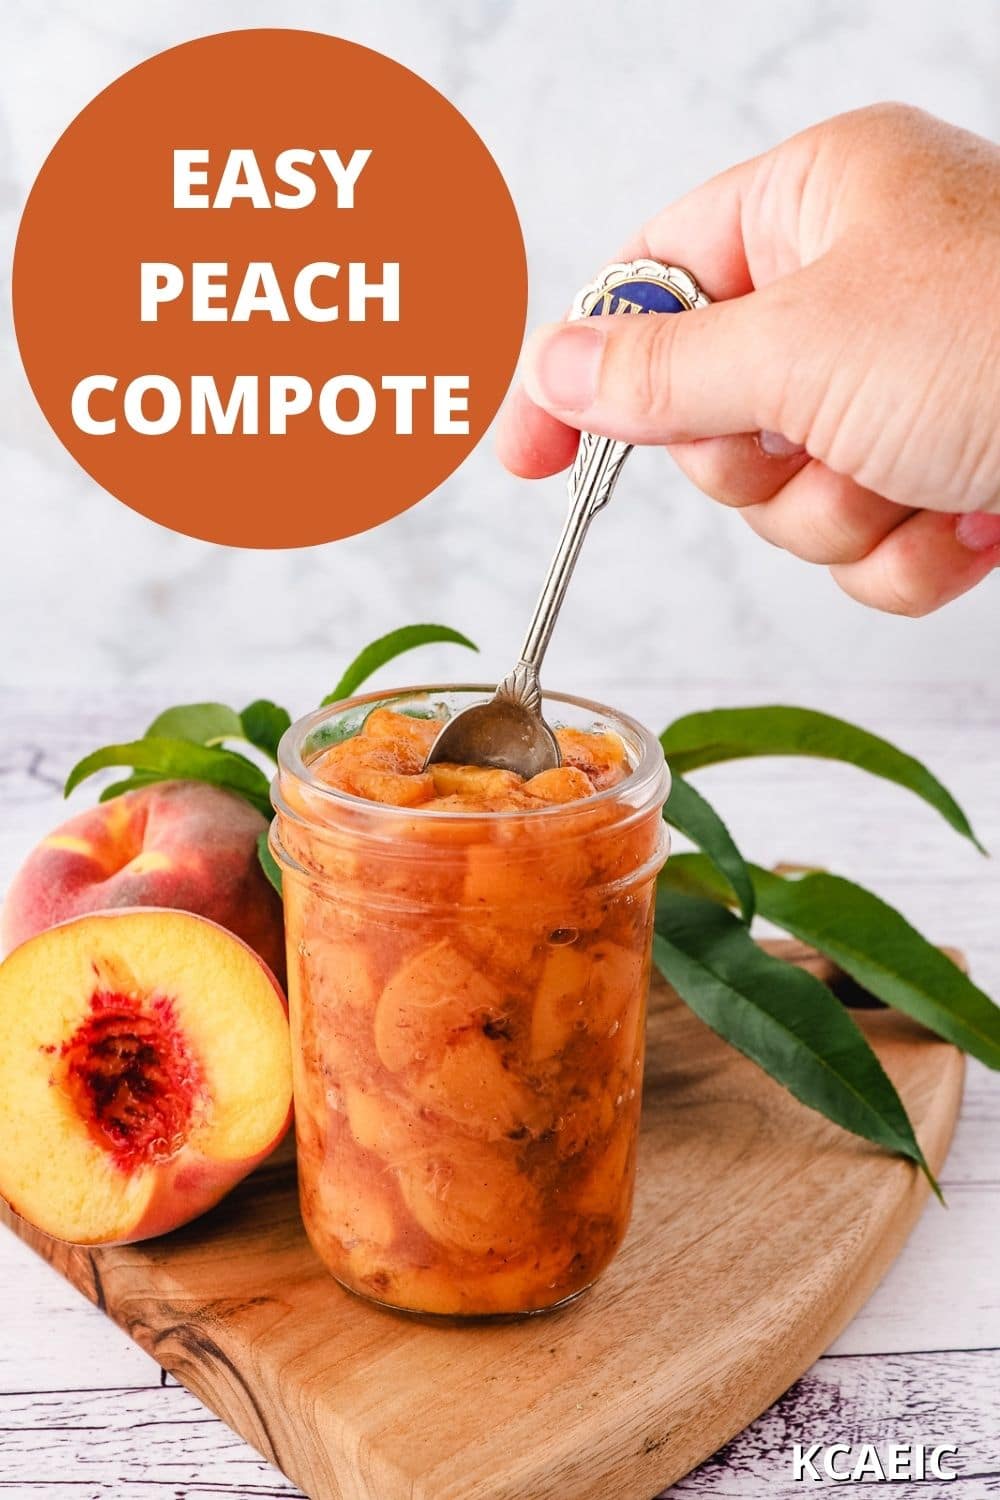 Spooning compote out of jar with fresh peaches and text overlay, easy peach compote and KCAEIC.